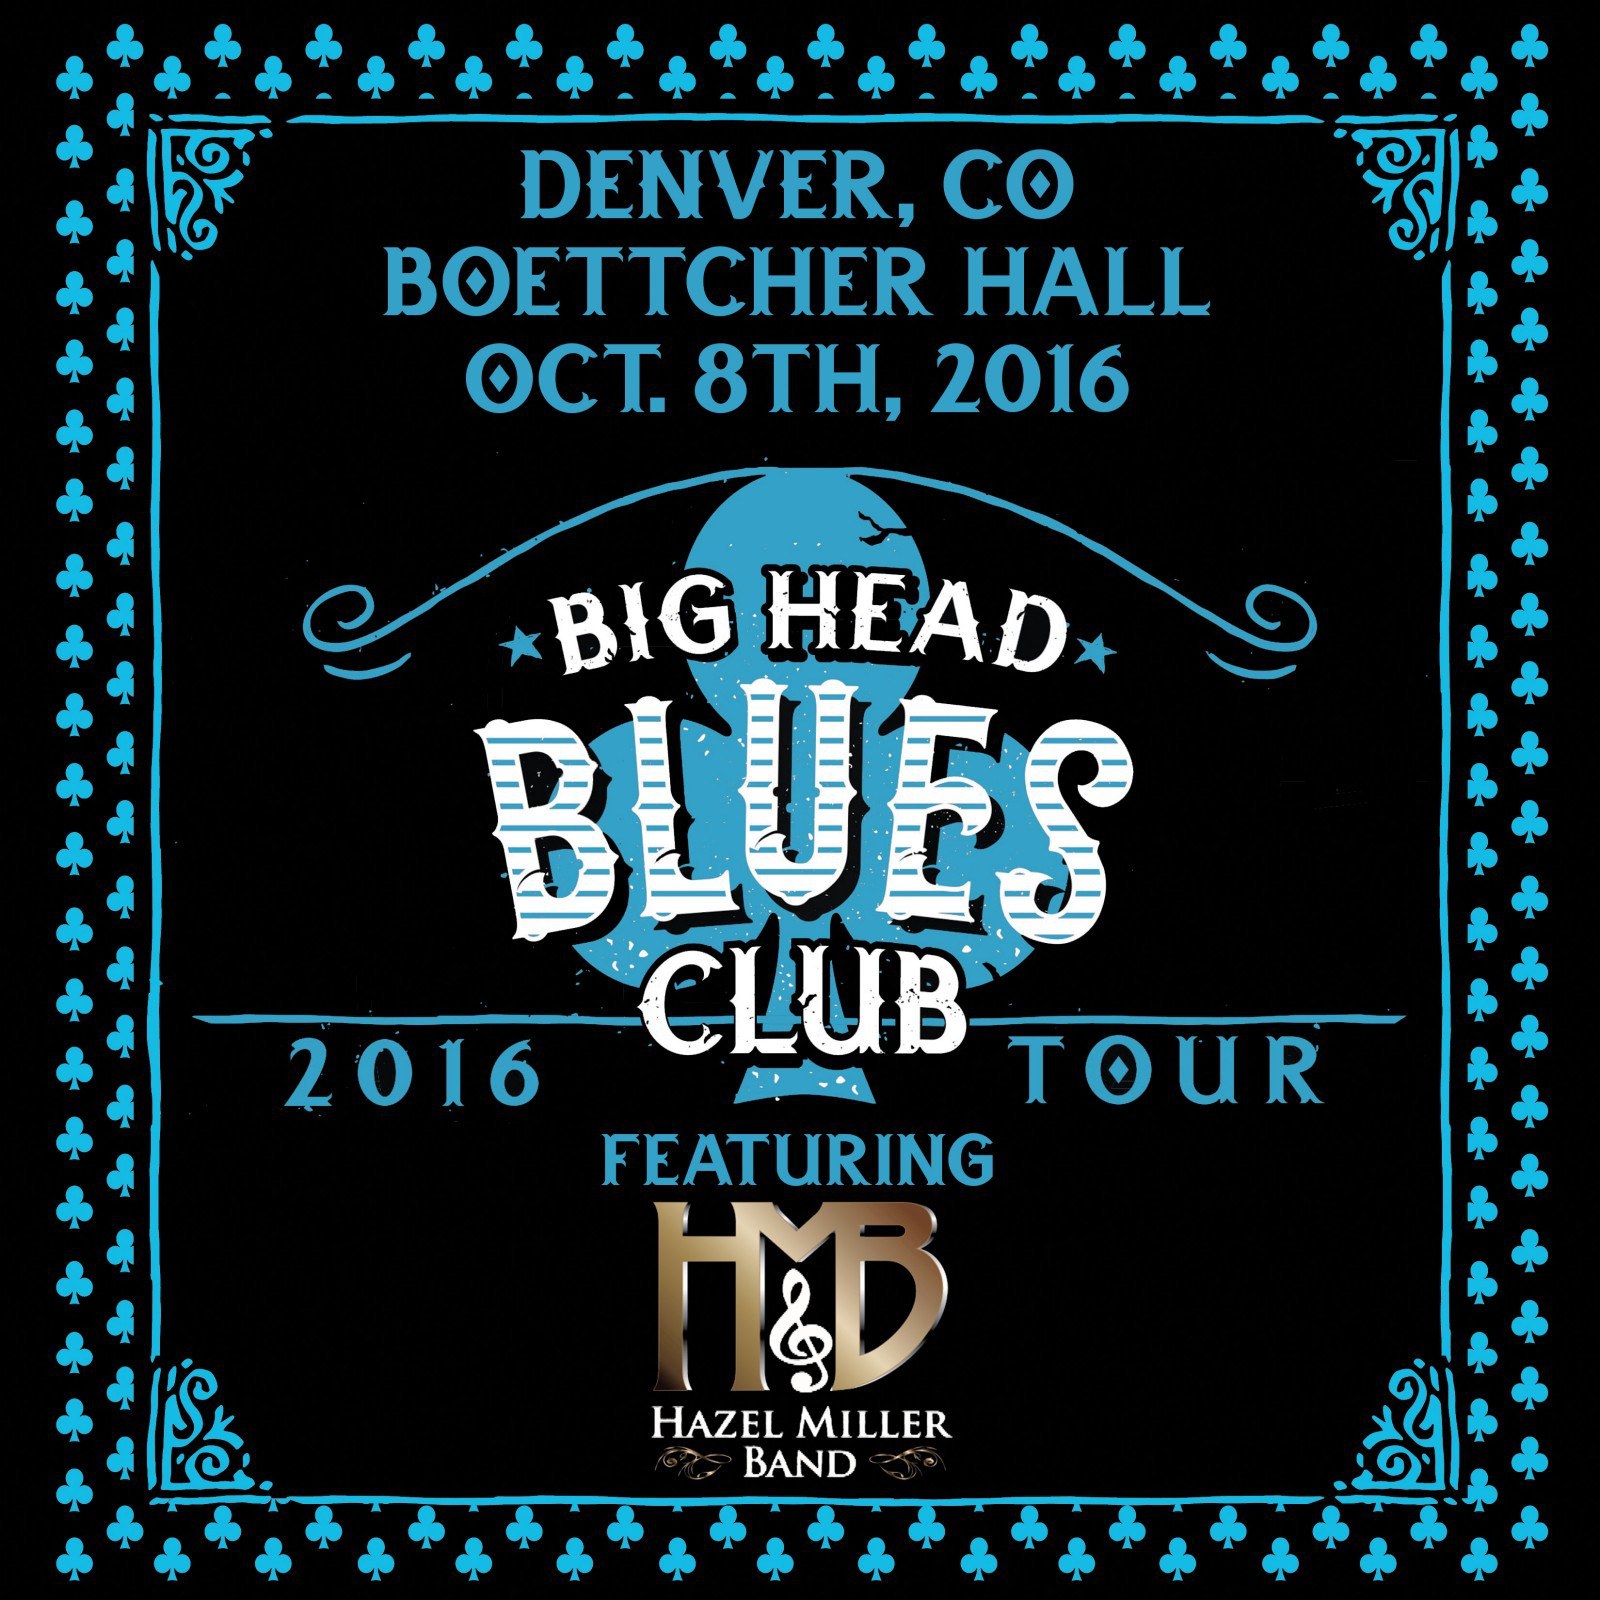 Hazel Miller Band to Join Big Head Blues Club in Denver on Oct 8th